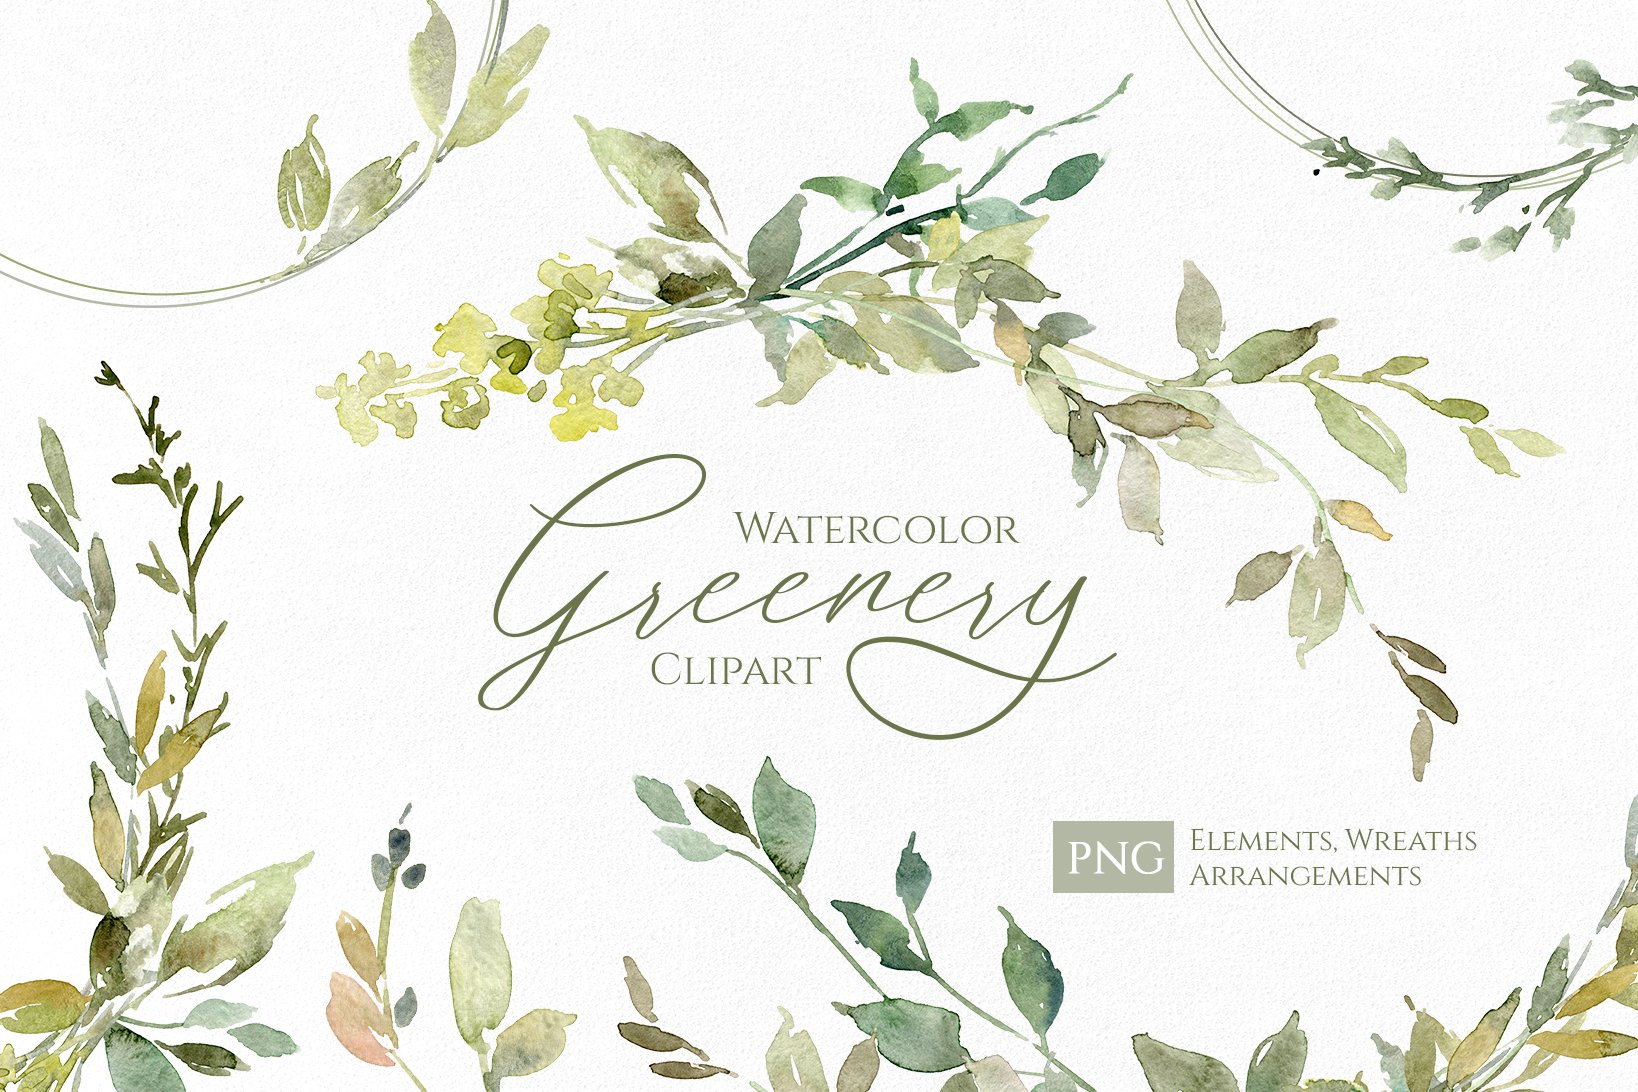 Watercolor greeney clipart with leaves and branches.